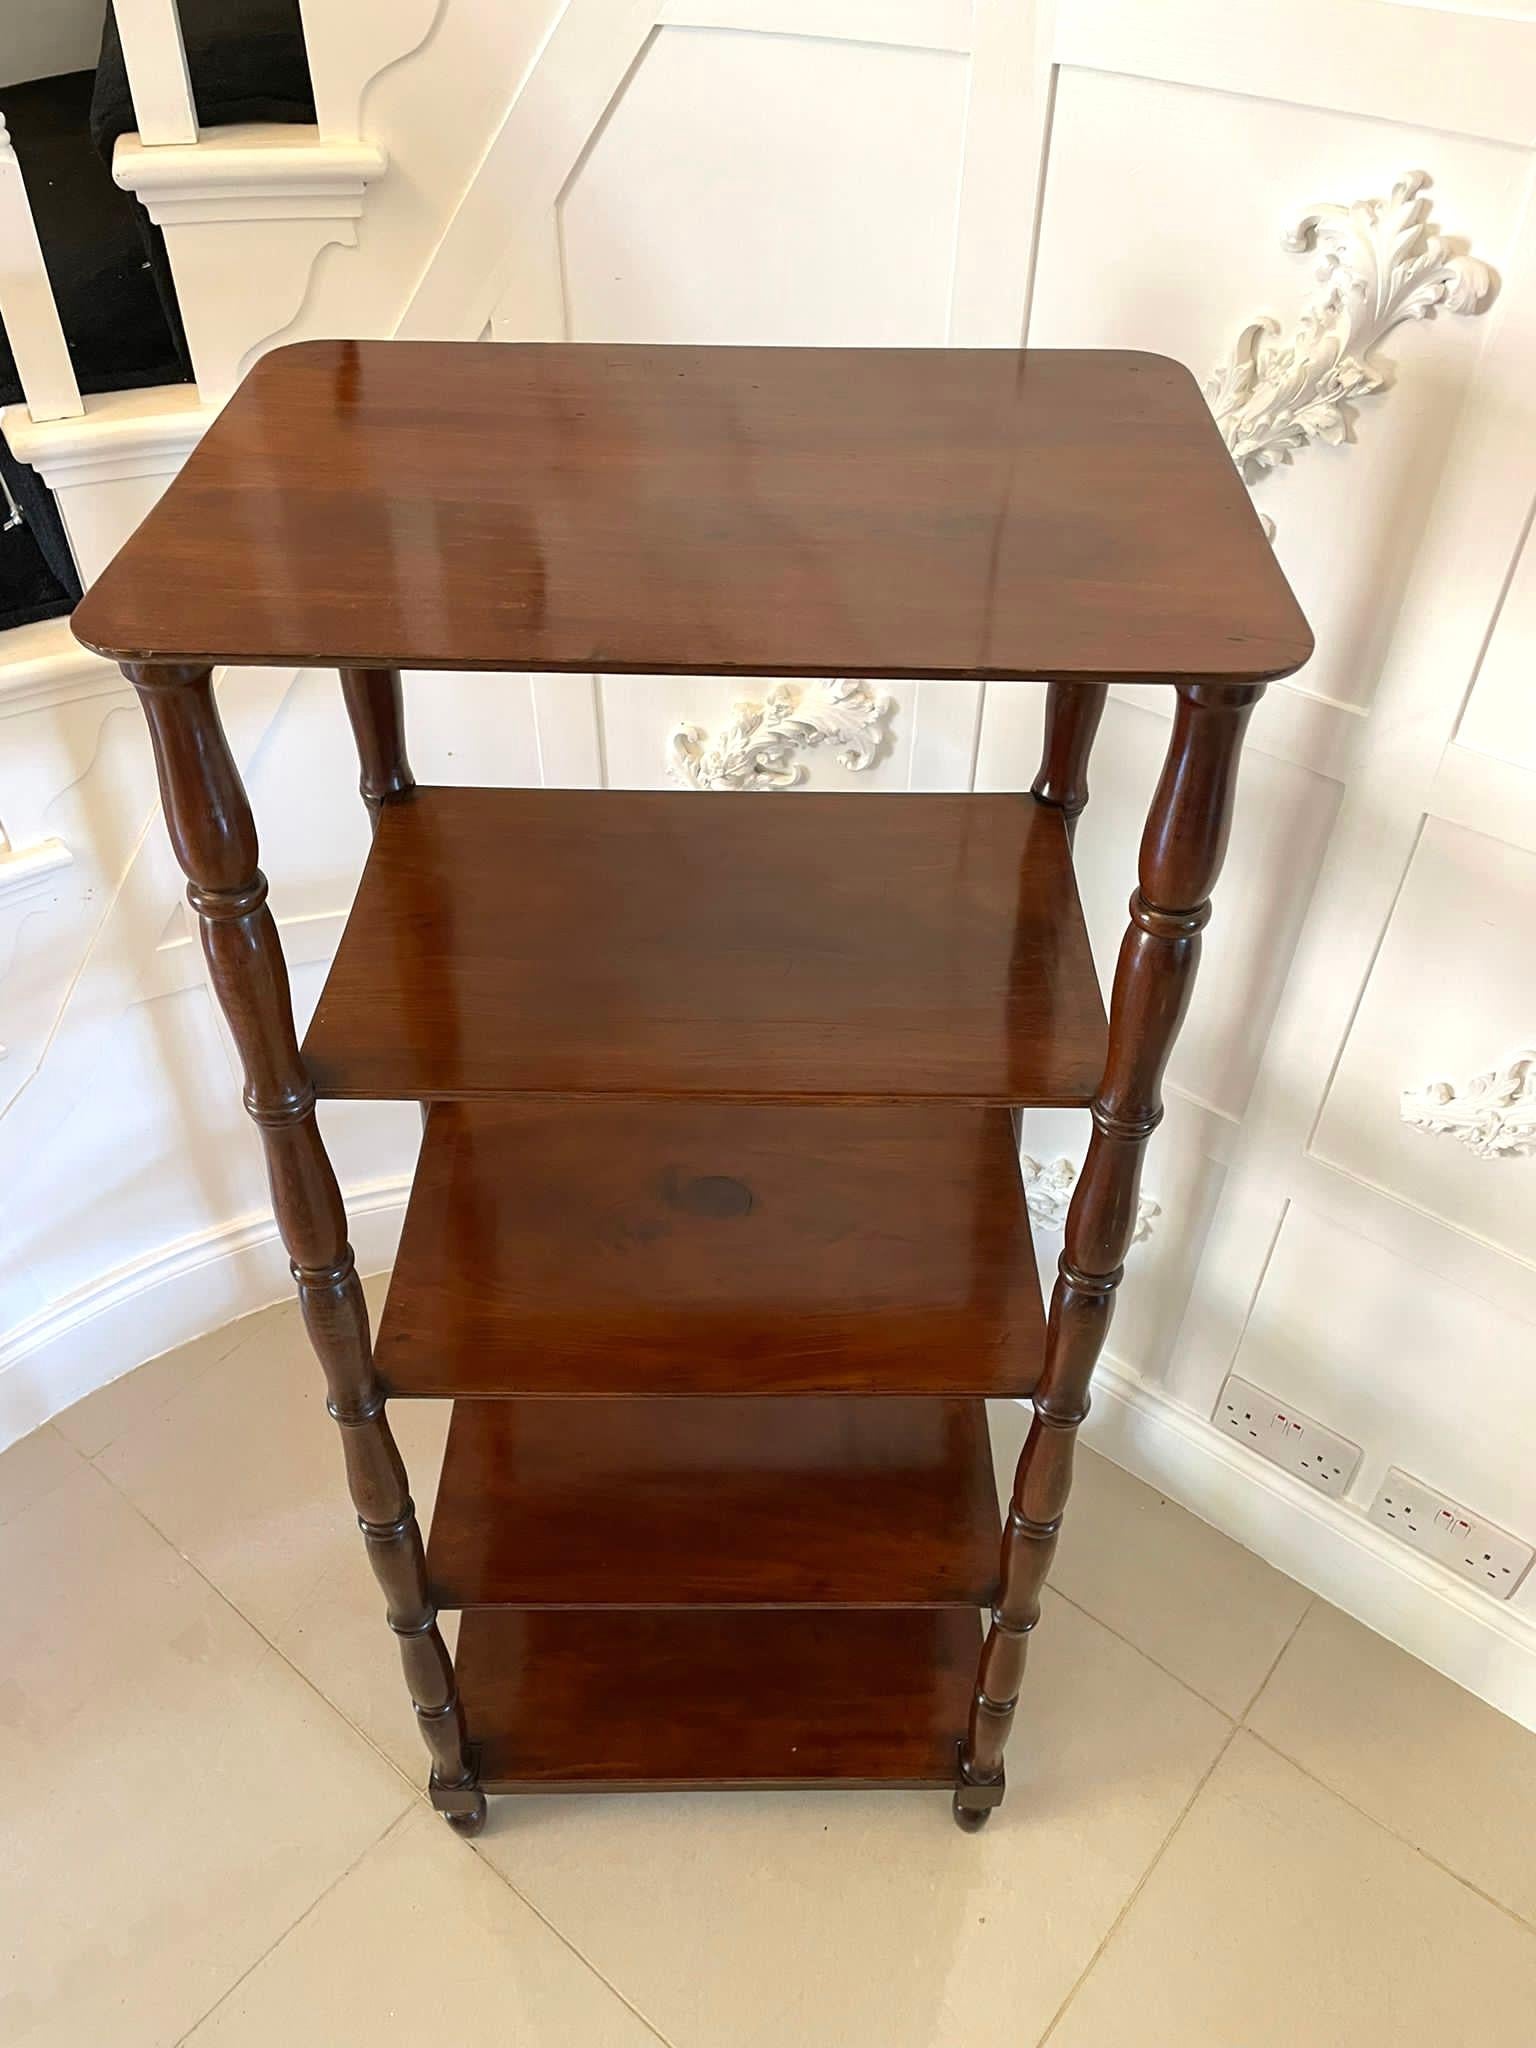 Antique Quality William IV Mahogany Freestanding Five Tier Whatnot In Good Condition For Sale In Suffolk, GB